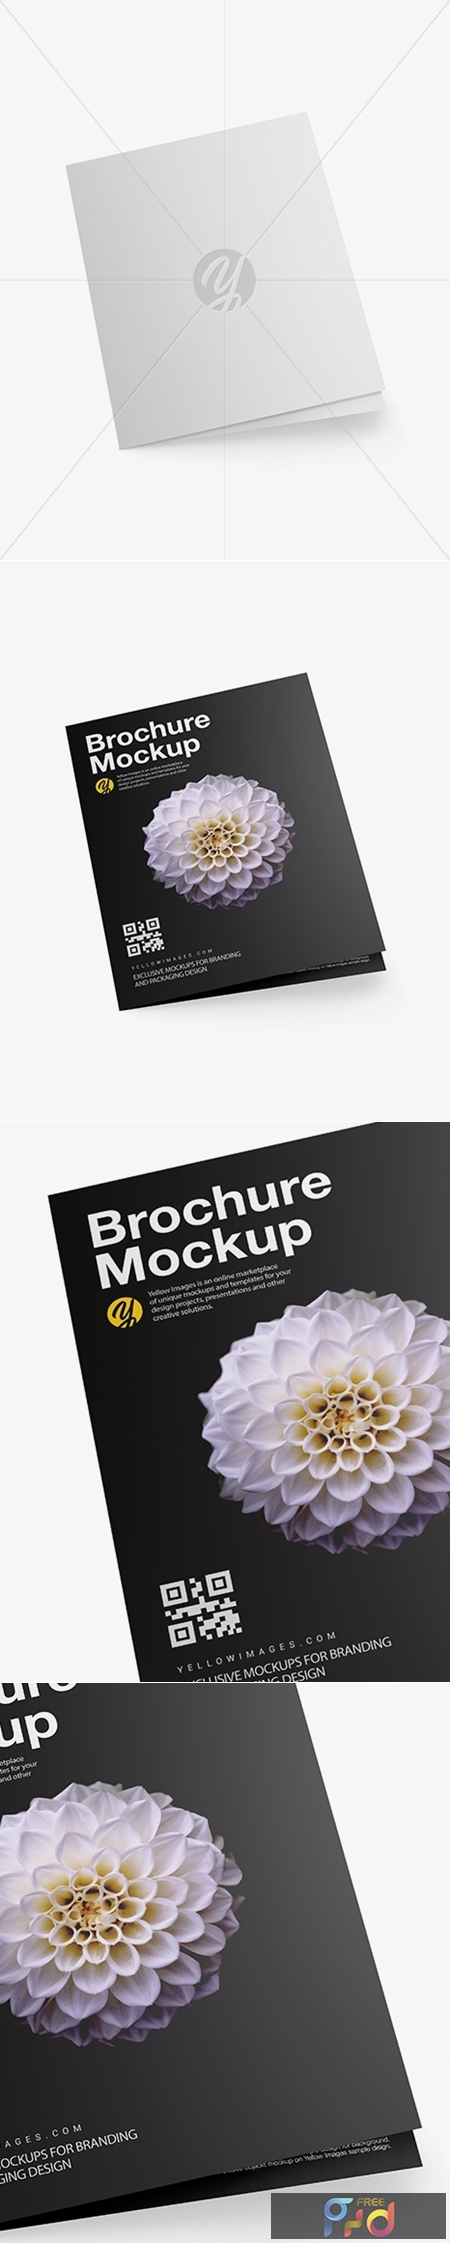 Download A5 Paper Mockup Free Download Free And Premium Packaging Mockup Psd Templates And Design Assets Yellowimages Mockups